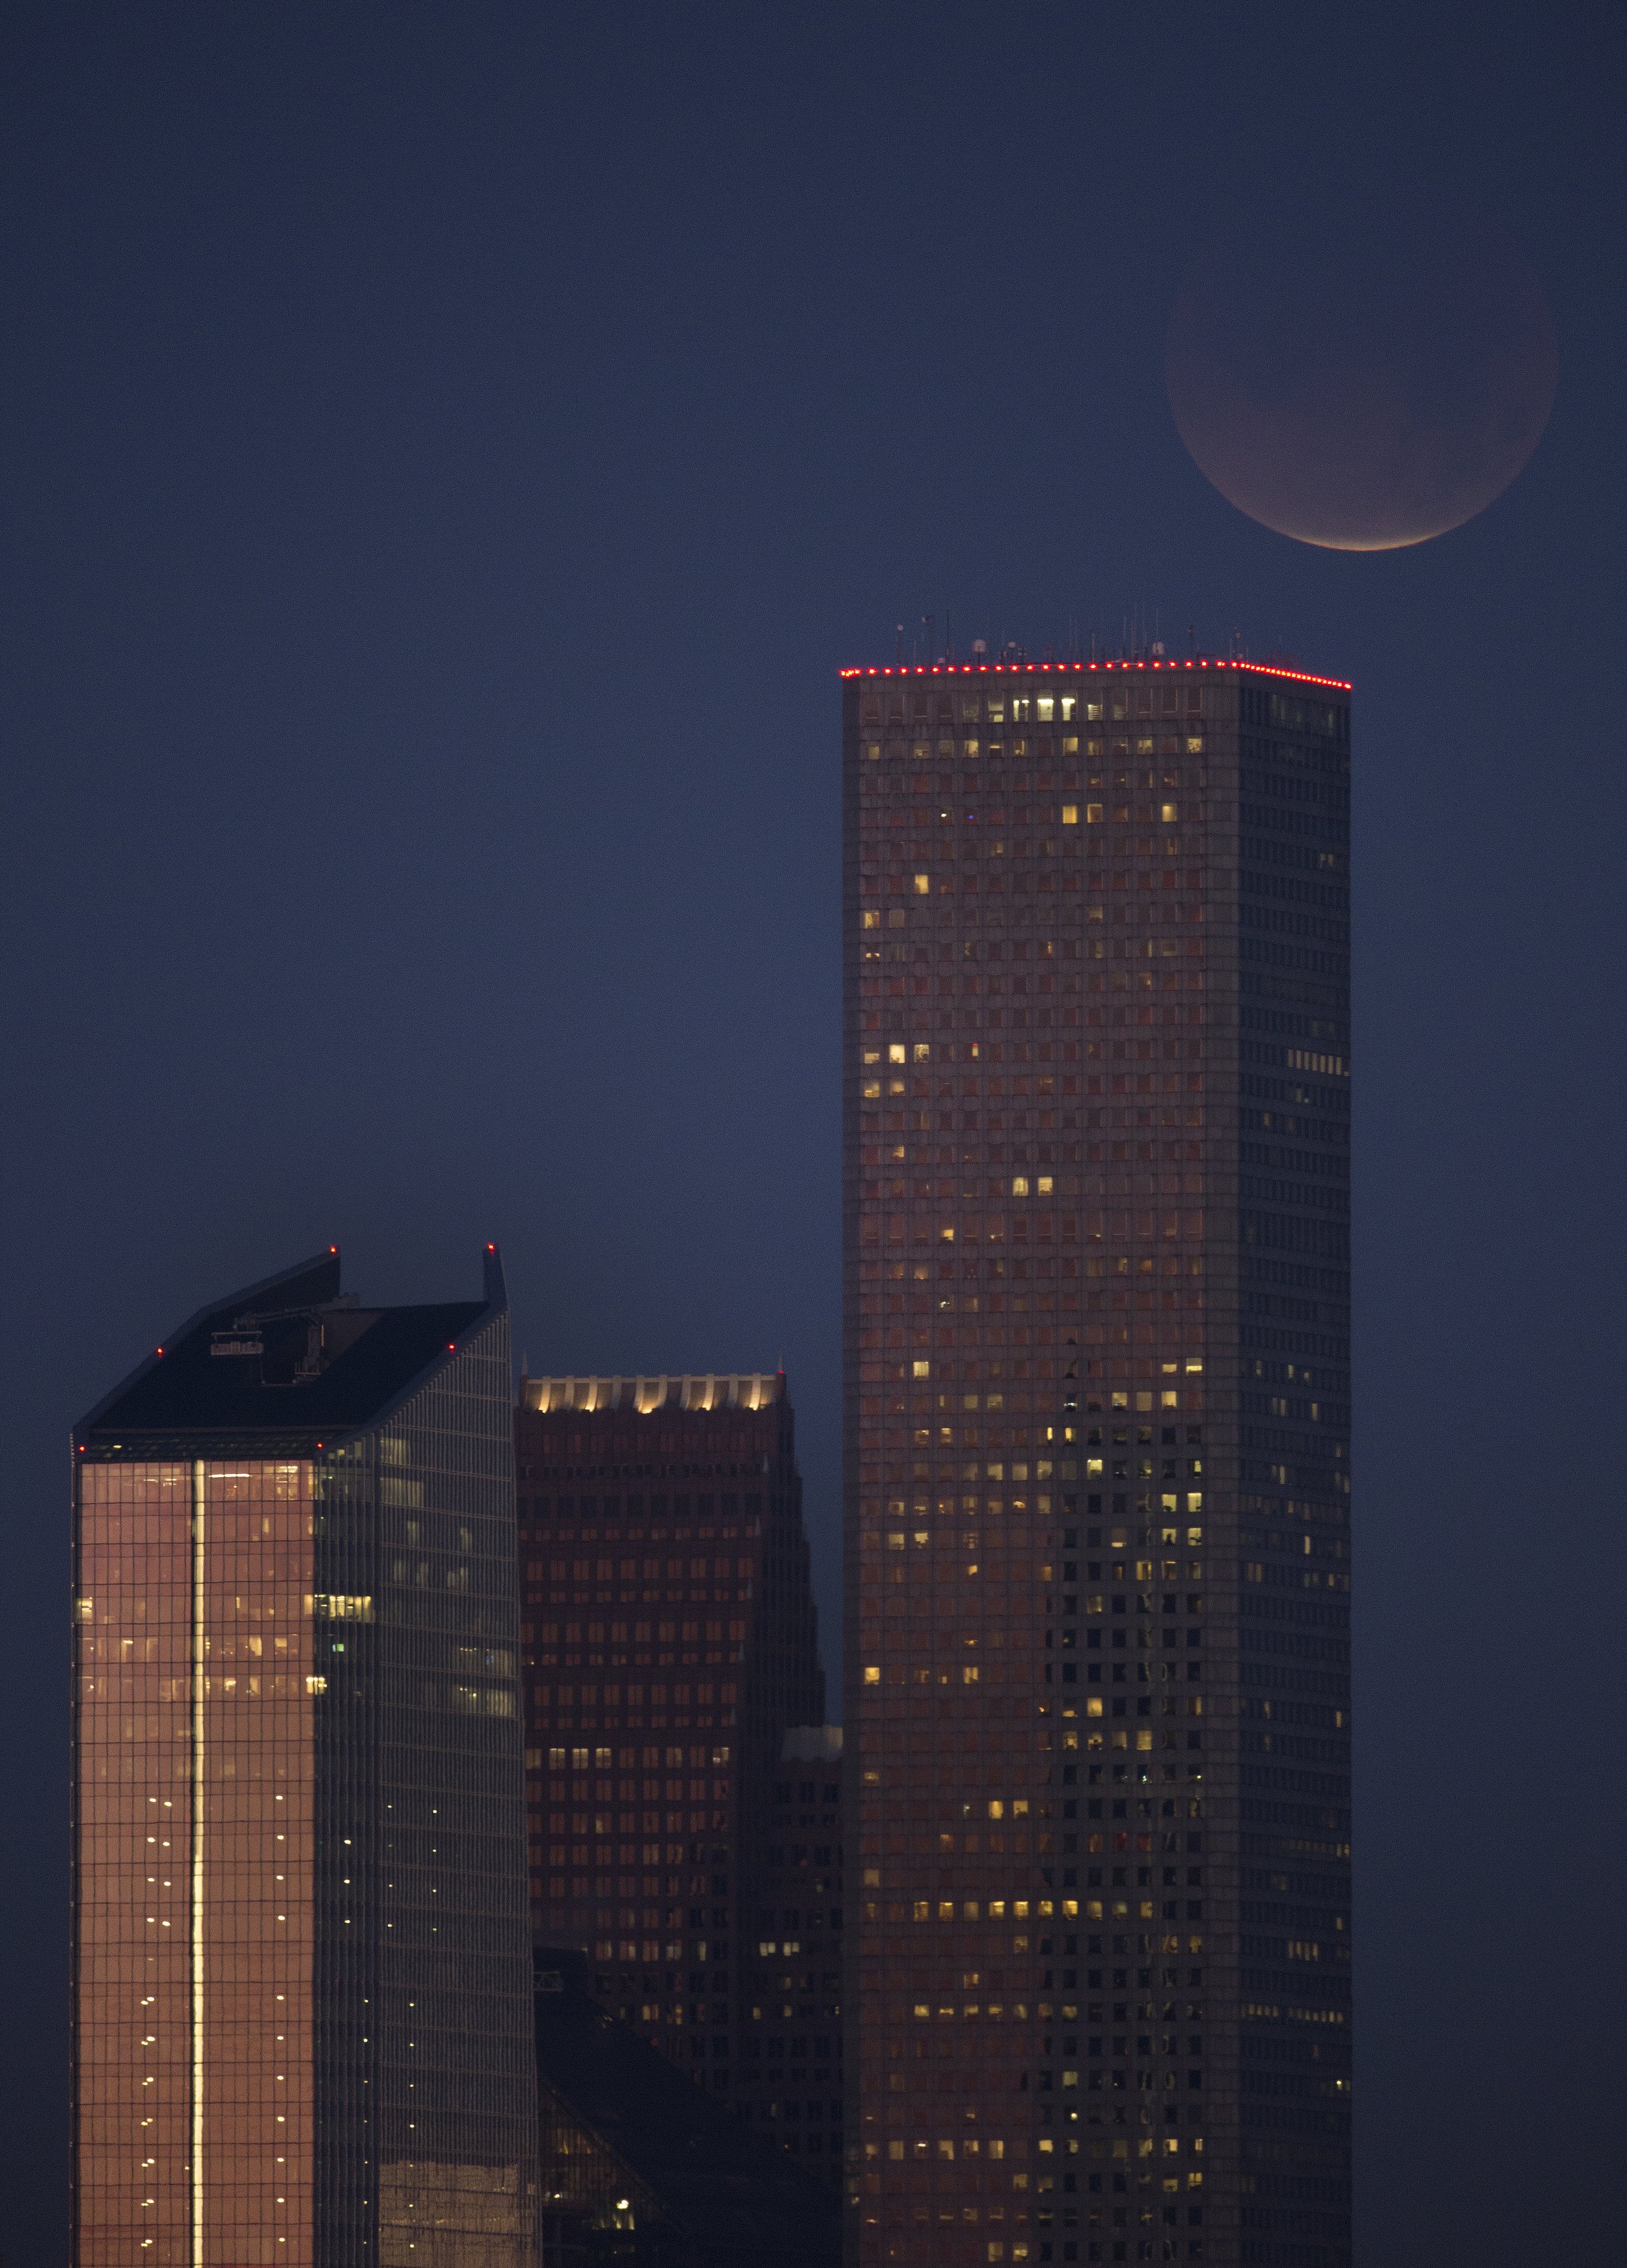  The super blood moon, near full eclipse, seen above the downtown skyline on Wednesday, Jan. 31, 2018, in Houston, Texas. 